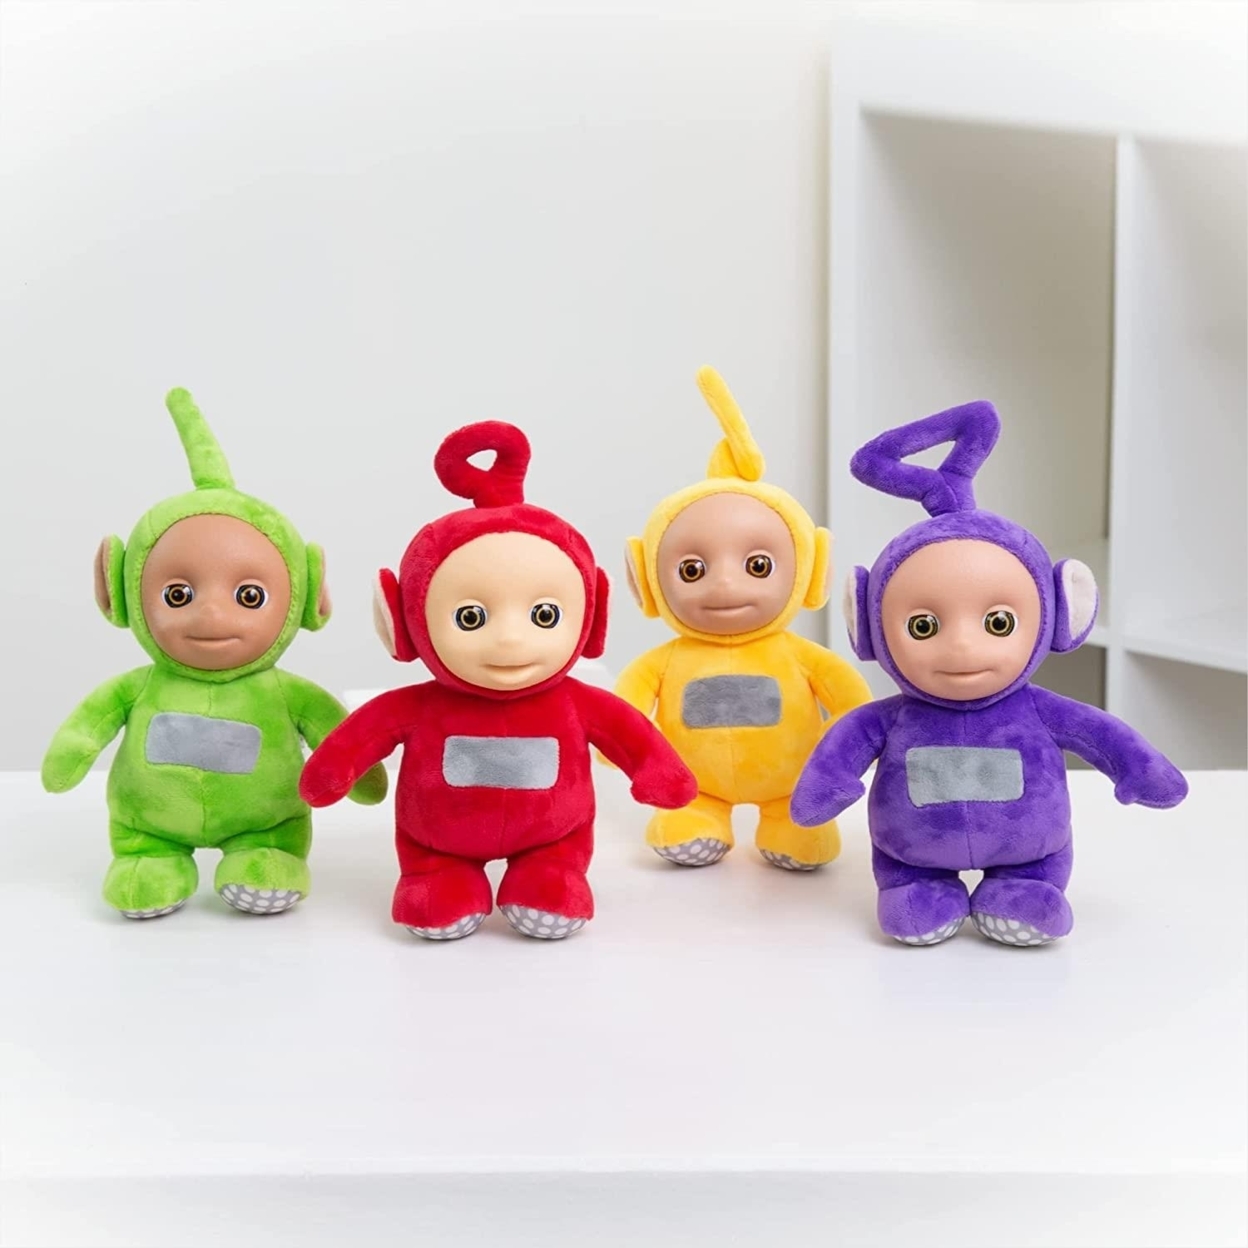 Teletubbies Talking Tinky Winky Purple Plush 11" Doll Giggles Teletubby Toy Mighty Mojo - image 5 of 6